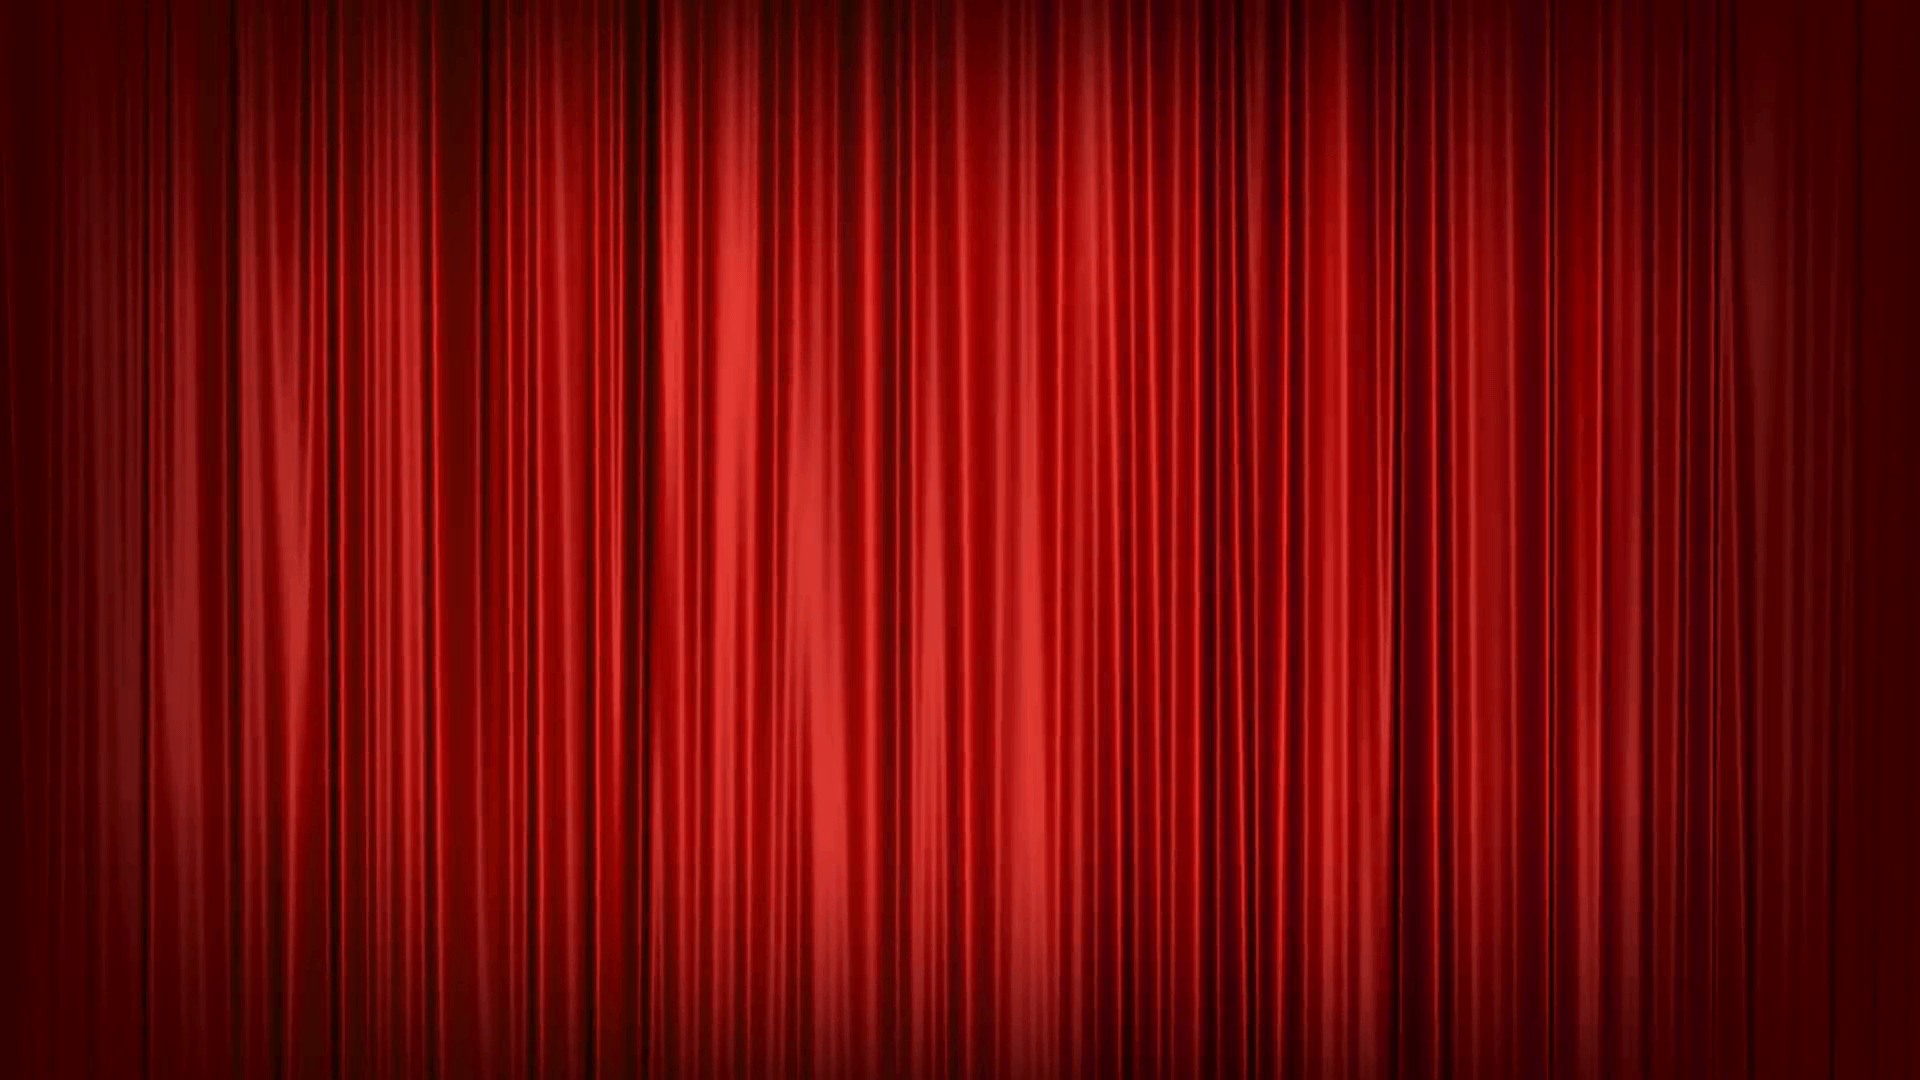 Stunning curtain background red for your theatrical performances